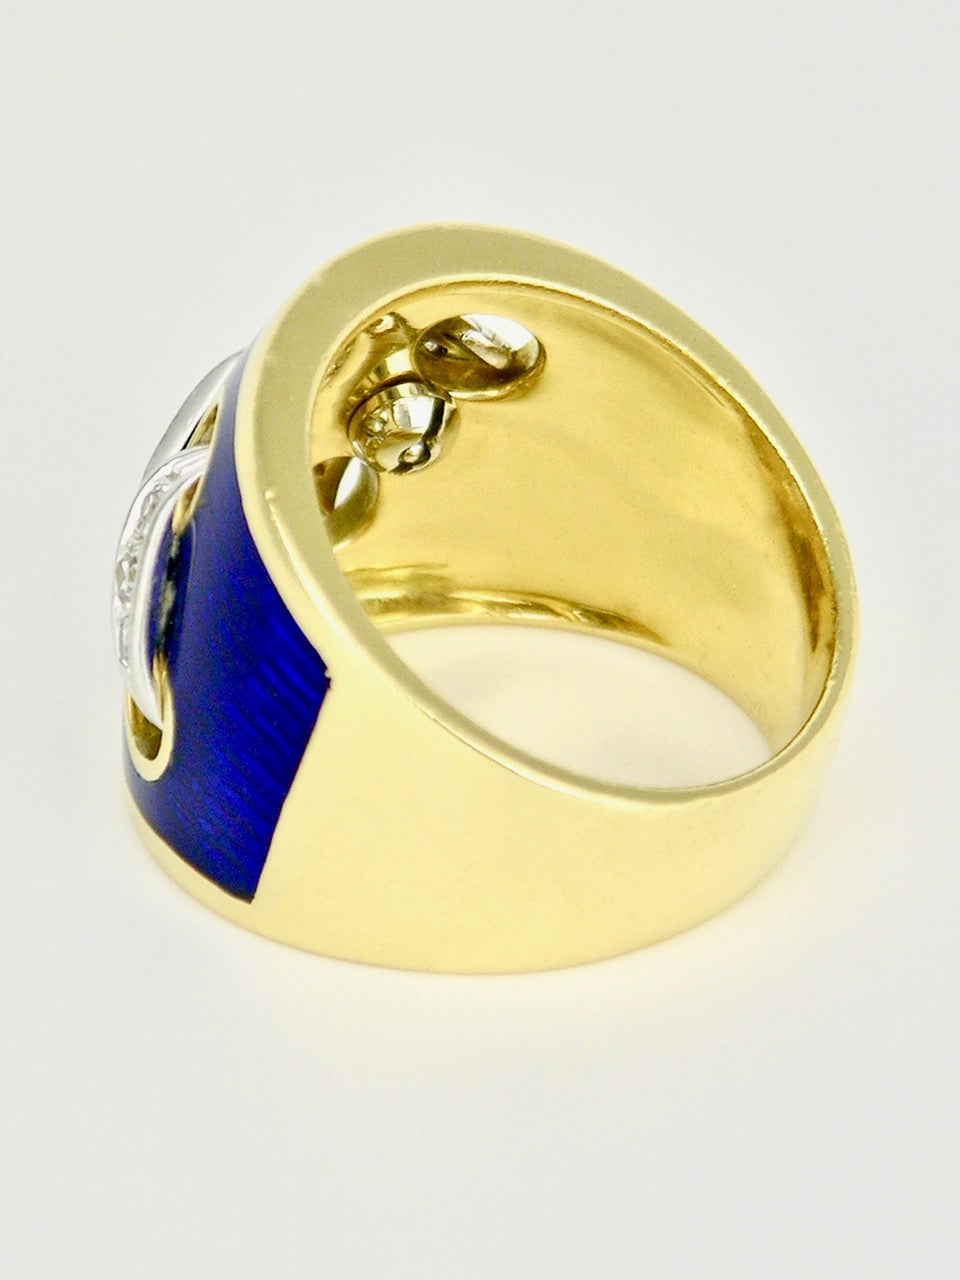 Italian Brilliance Deconstructed Panther Ring 14K Yellow Gold - Size 7 | Kay